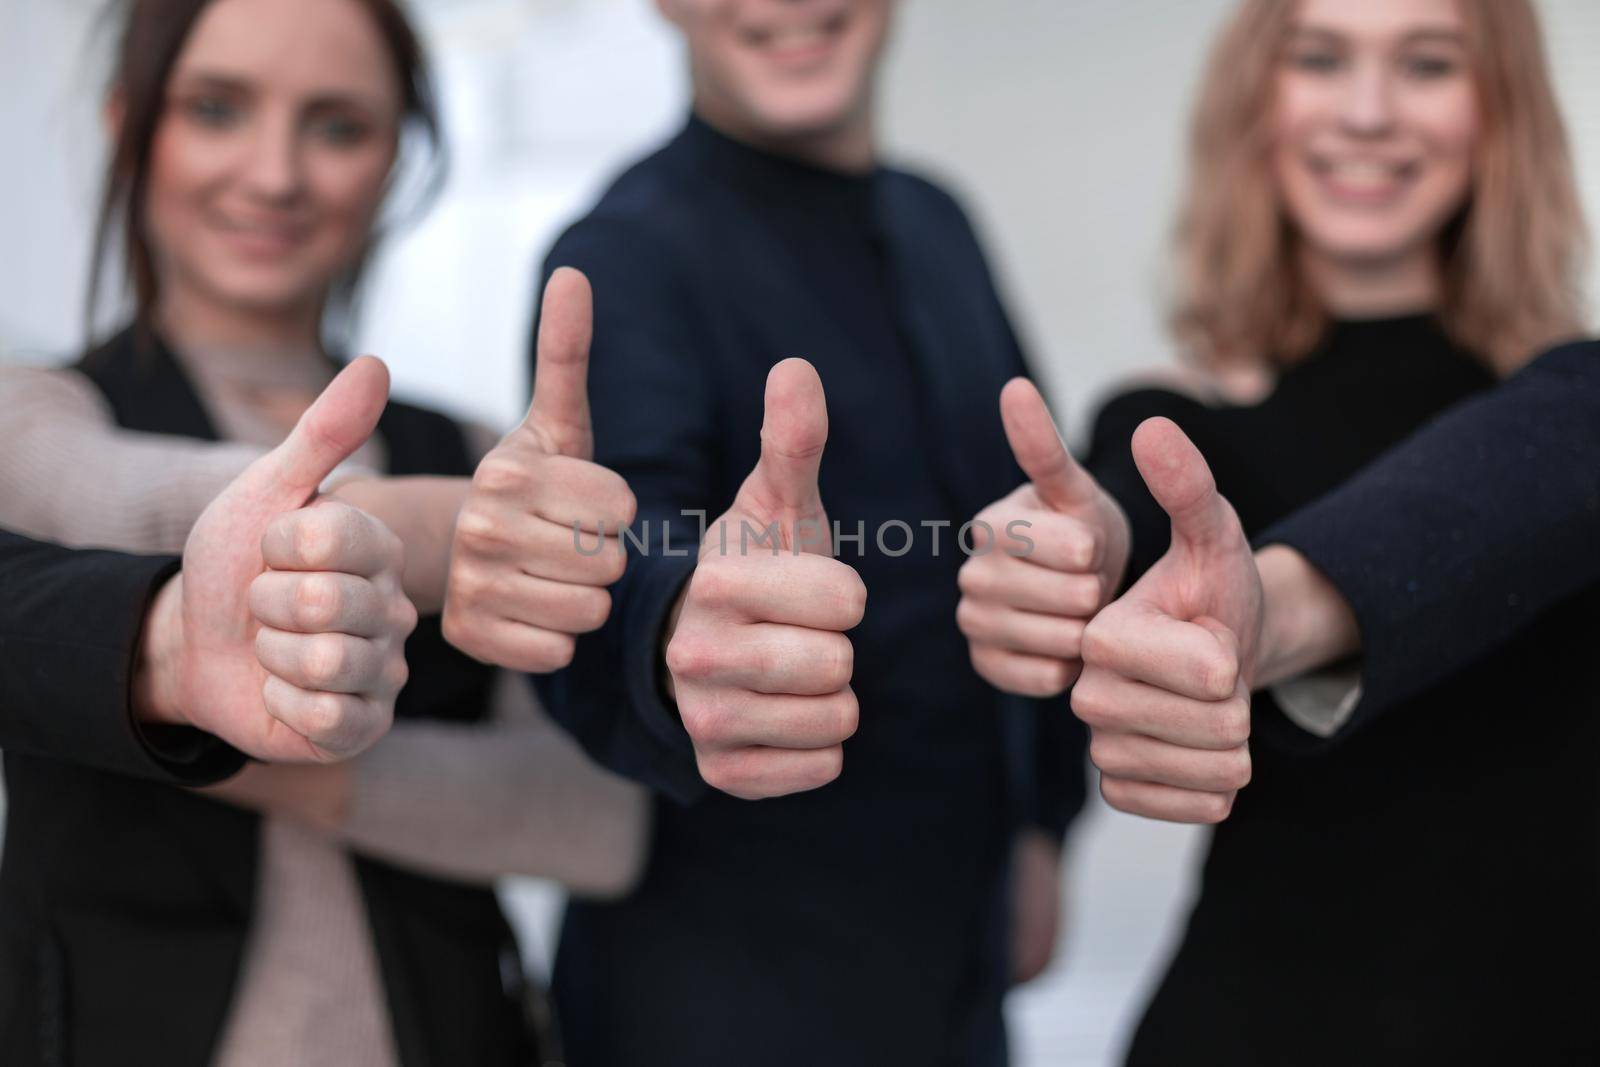 Close-up of group of business people raising their arms up and showing thumbs up